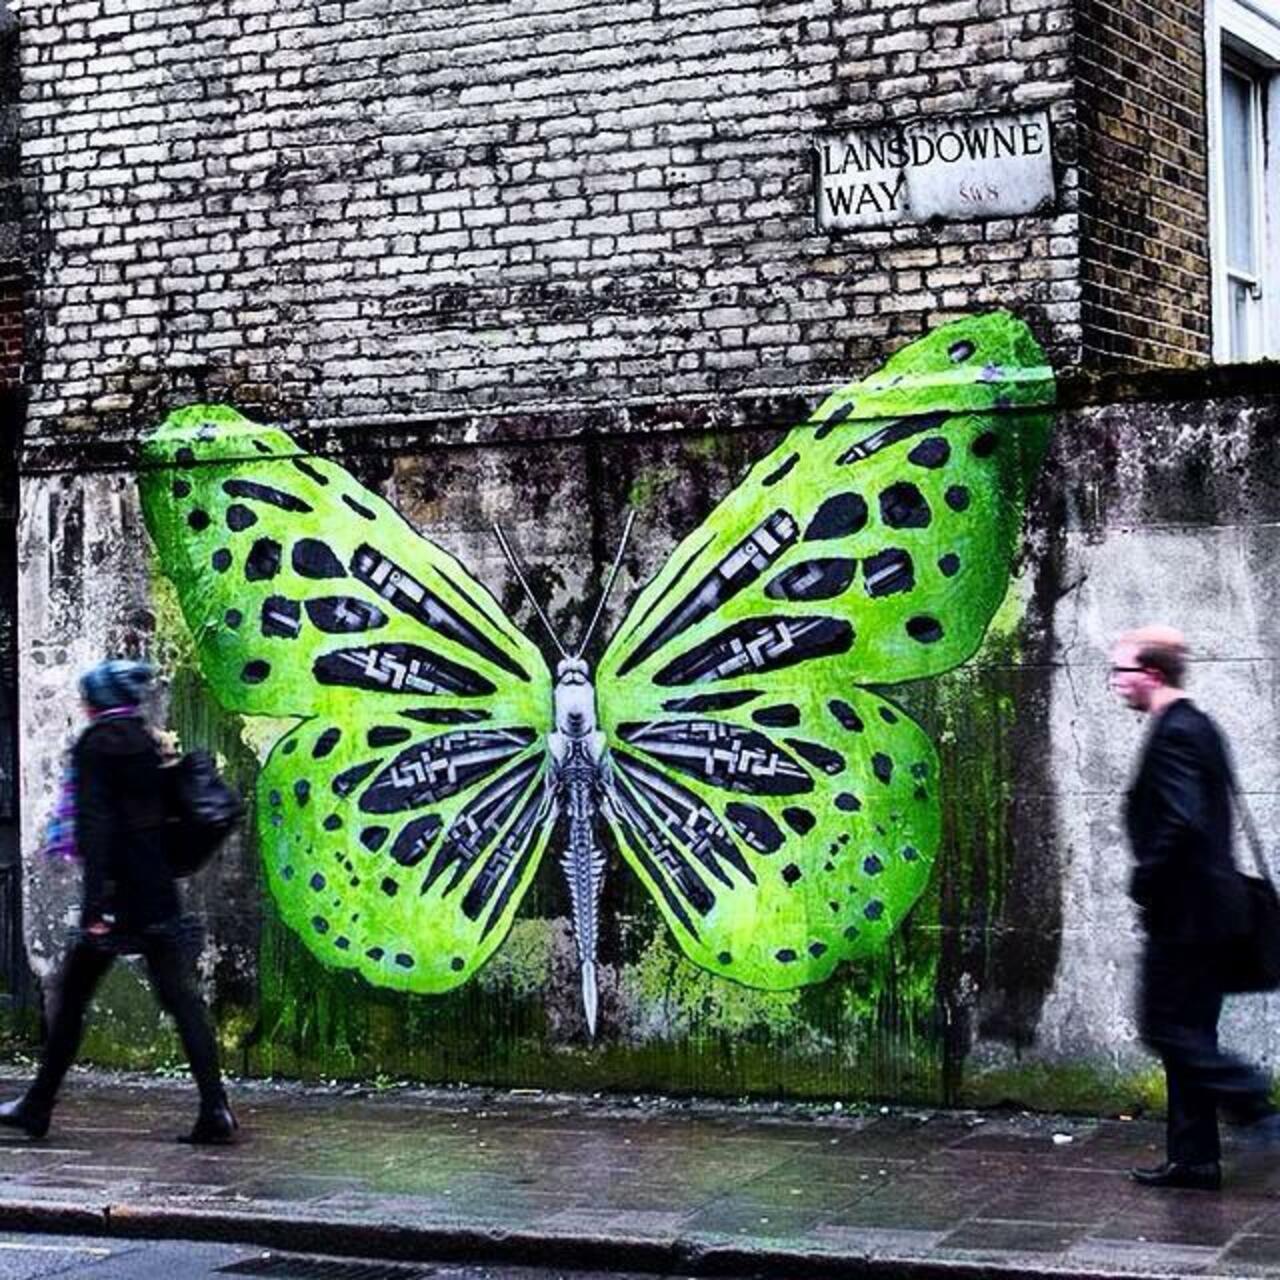 Technology & nature merge in this new Street Art piece by the artist LUDO

#art #mural #graffiti #streetart http://t.co/jOZQsNyQ5O